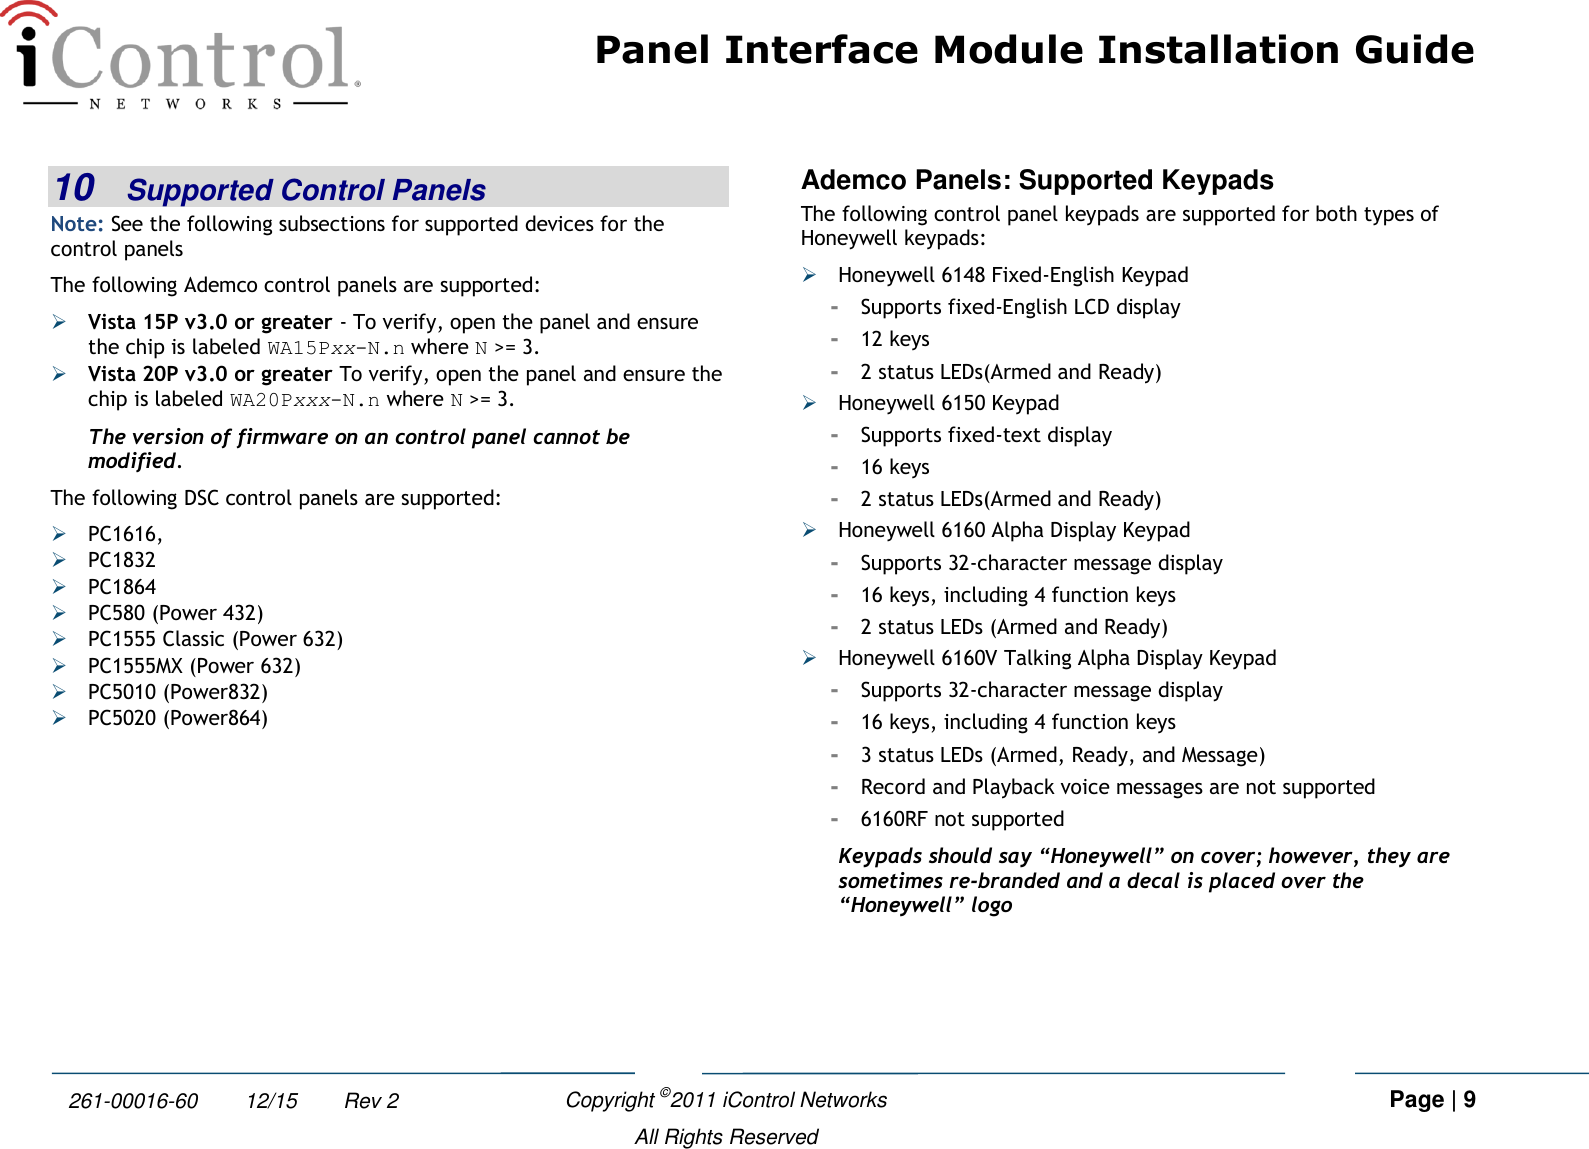 Panel Interface Module Installation Guide    Copyright ©2011 iControl Networks   Page | 9  All Rights Reserved 261-00016-60        12/15        Rev 2 10 Supported Control Panels Note: See the following subsections for supported devices for the control panels The following Ademco control panels are supported:  Vista 15P v3.0 or greater - To verify, open the panel and ensure the chip is labeled WA15Pxx-N.n where N &gt;= 3.  Vista 20P v3.0 or greater To verify, open the panel and ensure the chip is labeled WA20Pxxx-N.n where N &gt;= 3. The version of firmware on an control panel cannot be modified. The following DSC control panels are supported:  PC1616,  PC1832  PC1864  PC580 (Power 432)  PC1555 Classic (Power 632)  PC1555MX (Power 632)  PC5010 (Power832)  PC5020 (Power864) Ademco Panels: Supported Keypads The following control panel keypads are supported for both types of Honeywell keypads:  Honeywell 6148 Fixed-English Keypad -  Supports fixed-English LCD display -  12 keys -  2 status LEDs(Armed and Ready)  Honeywell 6150 Keypad -  Supports fixed-text display -  16 keys -  2 status LEDs(Armed and Ready)  Honeywell 6160 Alpha Display Keypad -  Supports 32-character message display -  16 keys, including 4 function keys -  2 status LEDs (Armed and Ready)  Honeywell 6160V Talking Alpha Display Keypad -  Supports 32-character message display -  16 keys, including 4 function keys -  3 status LEDs (Armed, Ready, and Message) -  Record and Playback voice messages are not supported -  6160RF not supported Keypads should say “Honeywell” on cover; however, they are sometimes re-branded and a decal is placed over the “Honeywell” logo  